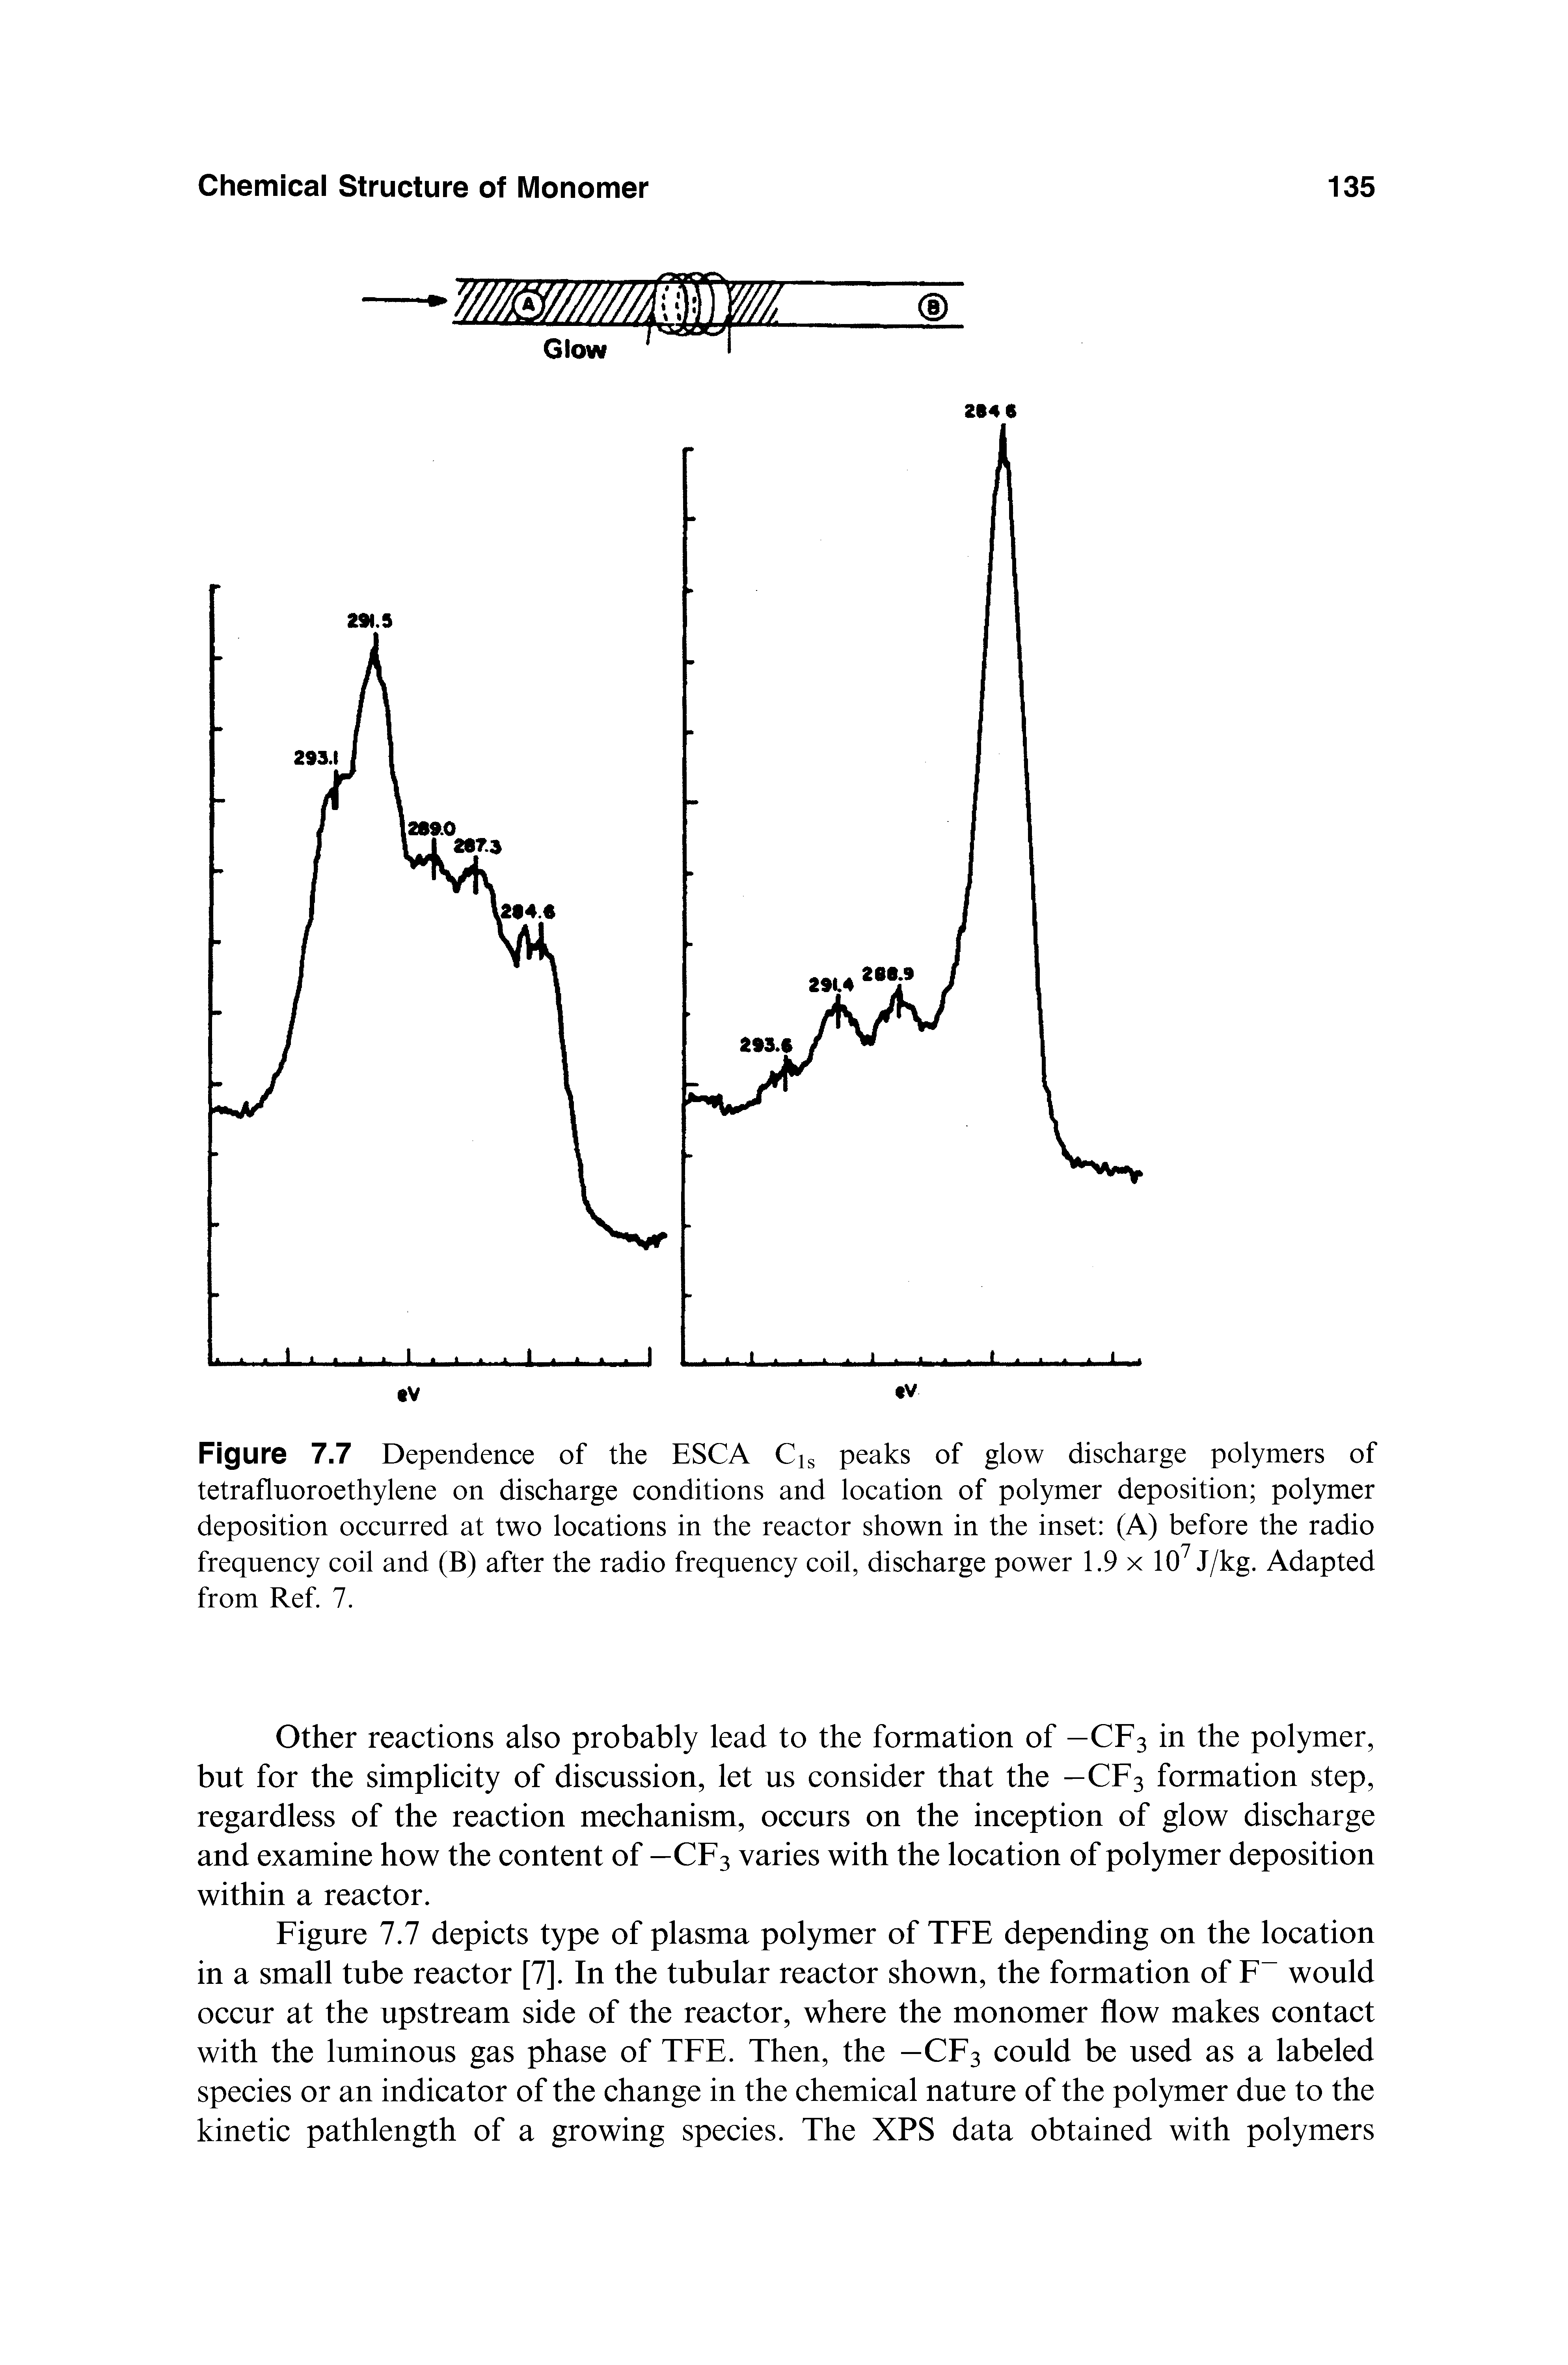 Figure 7.7 Dependence of the ESCA Cis peaks of glow discharge polymers of tetrafluoroethylene on discharge conditions and location of polymer deposition polymer deposition occurred at two locations in the reactor shown in the inset (A) before the radio frequency coil and (B) after the radio frequency coil, discharge power 1.9 x 10 J/kg. Adapted from Ref. 7.